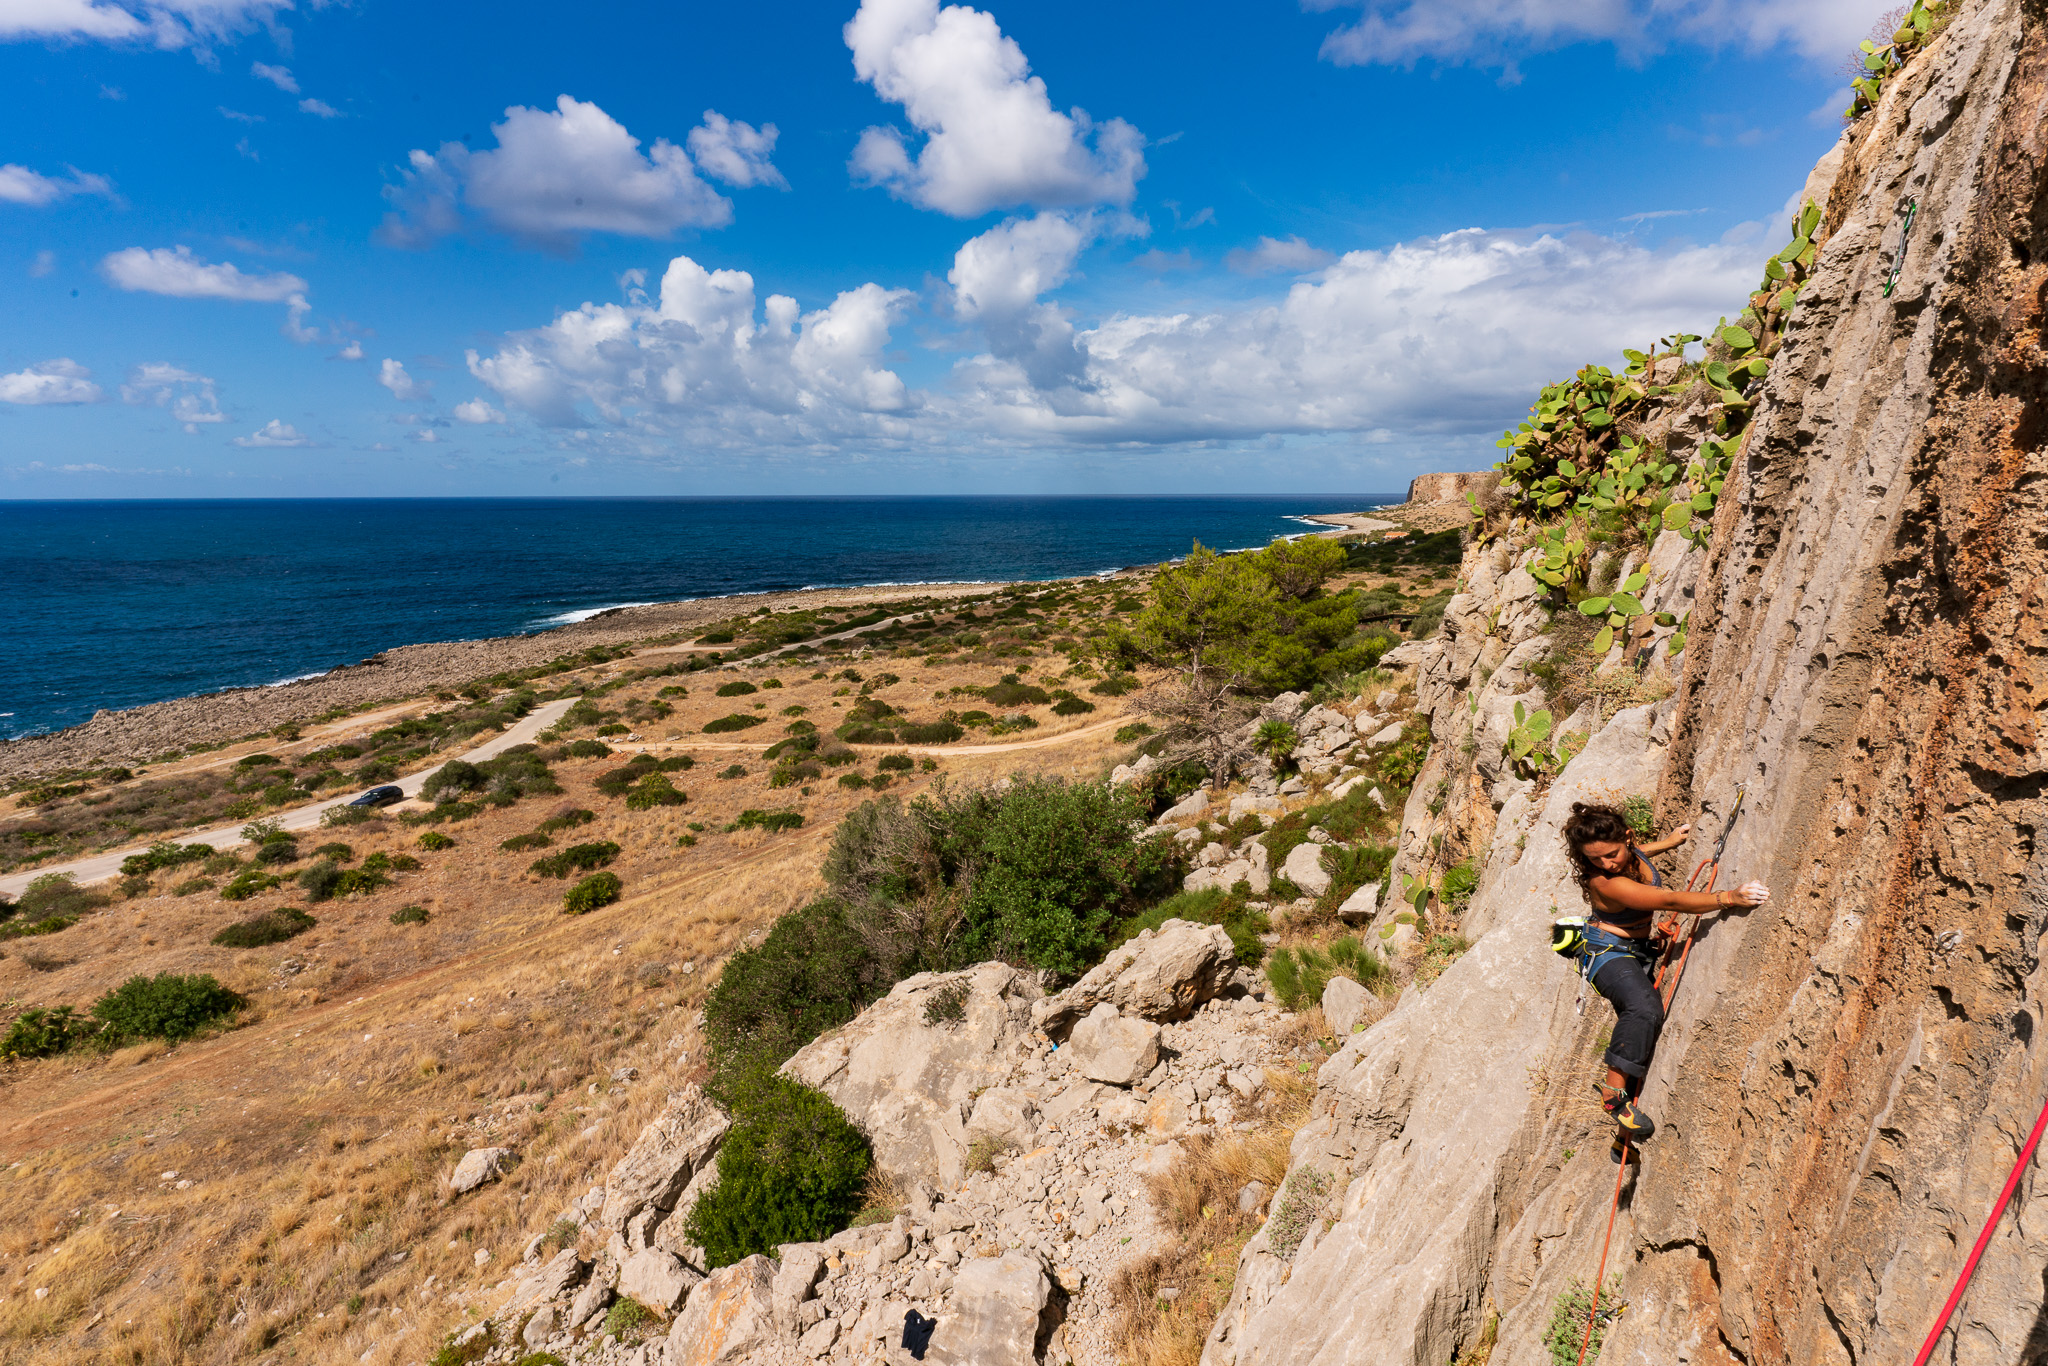 A person sport climbing in Sicily, Italy